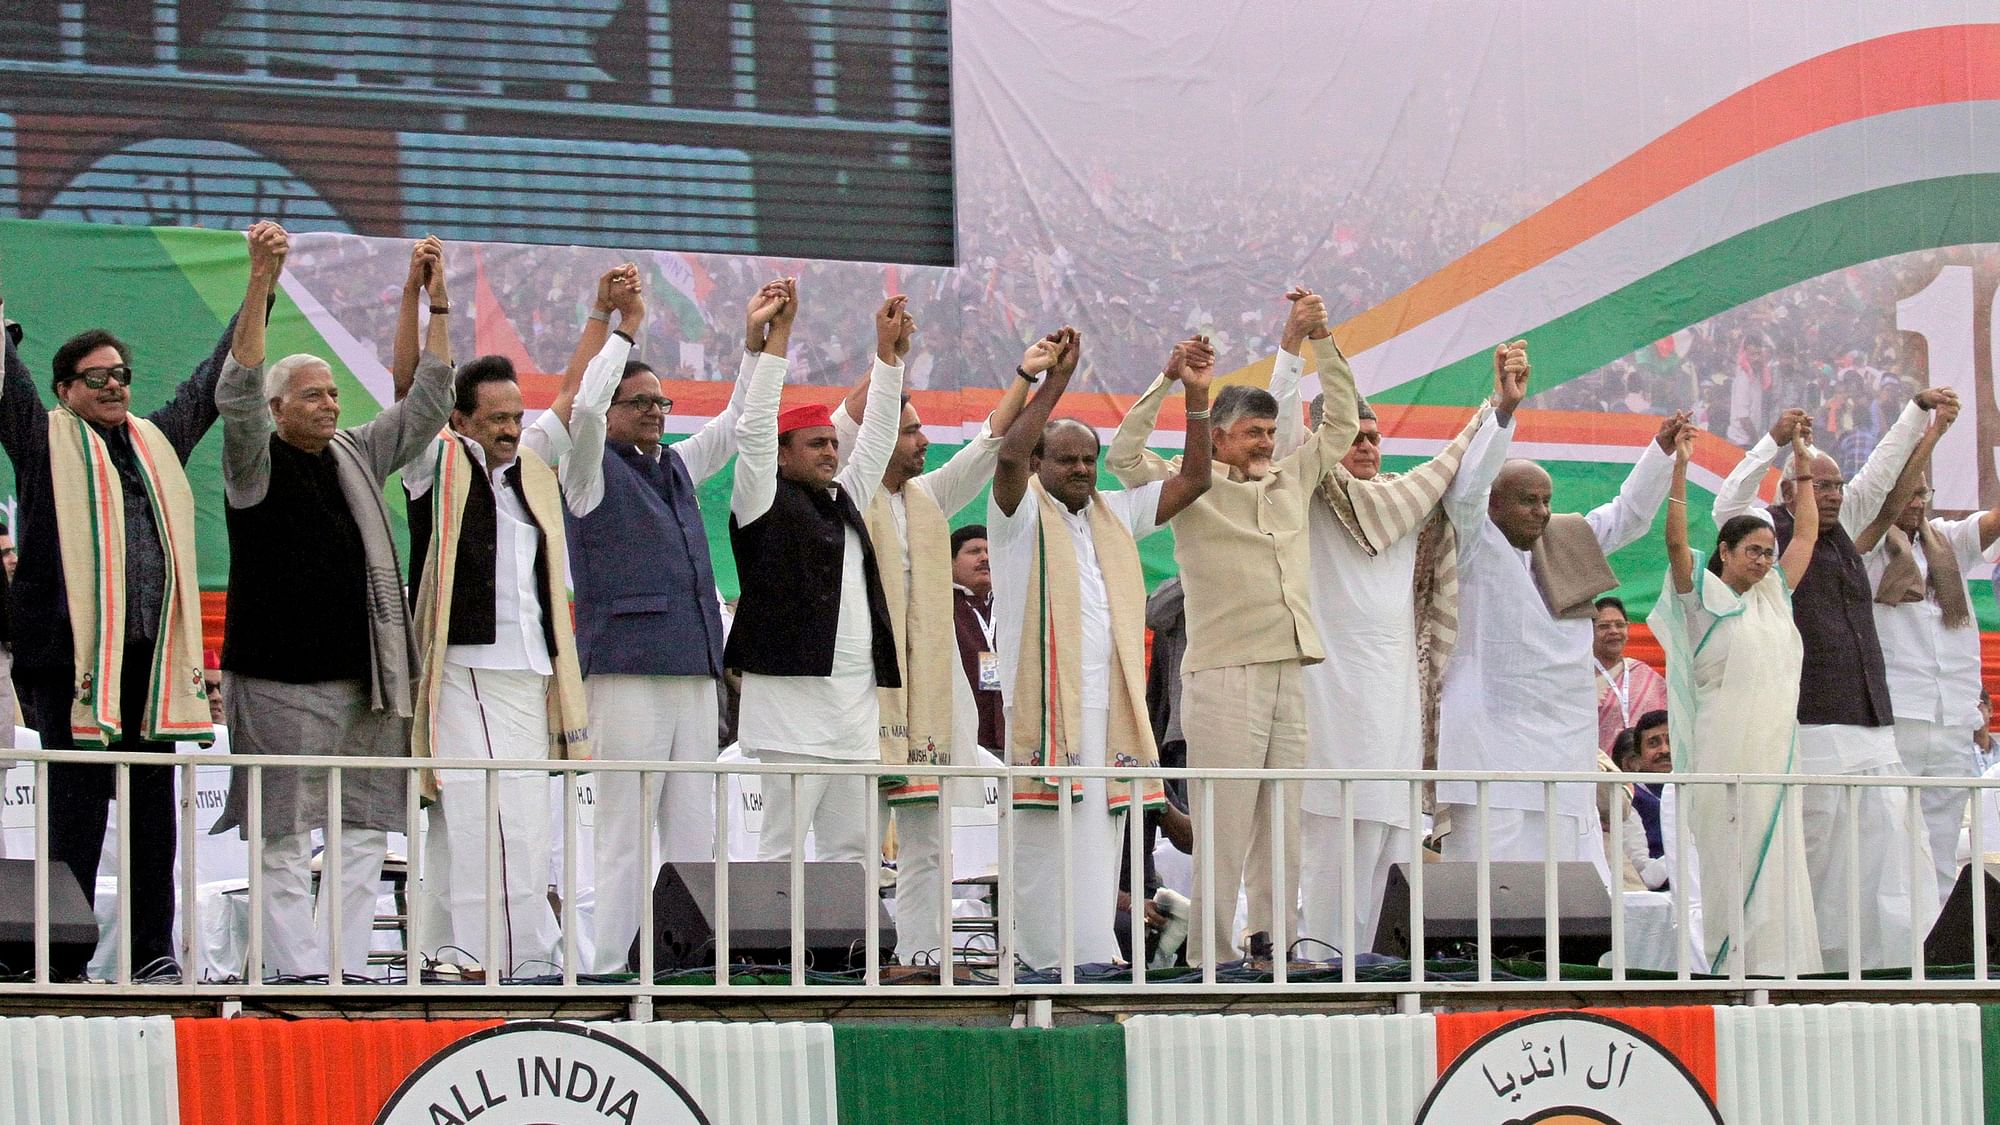 Opposition parties join hands during a public rally organised by Trinamool Congress party in Kolkata on 19 January.